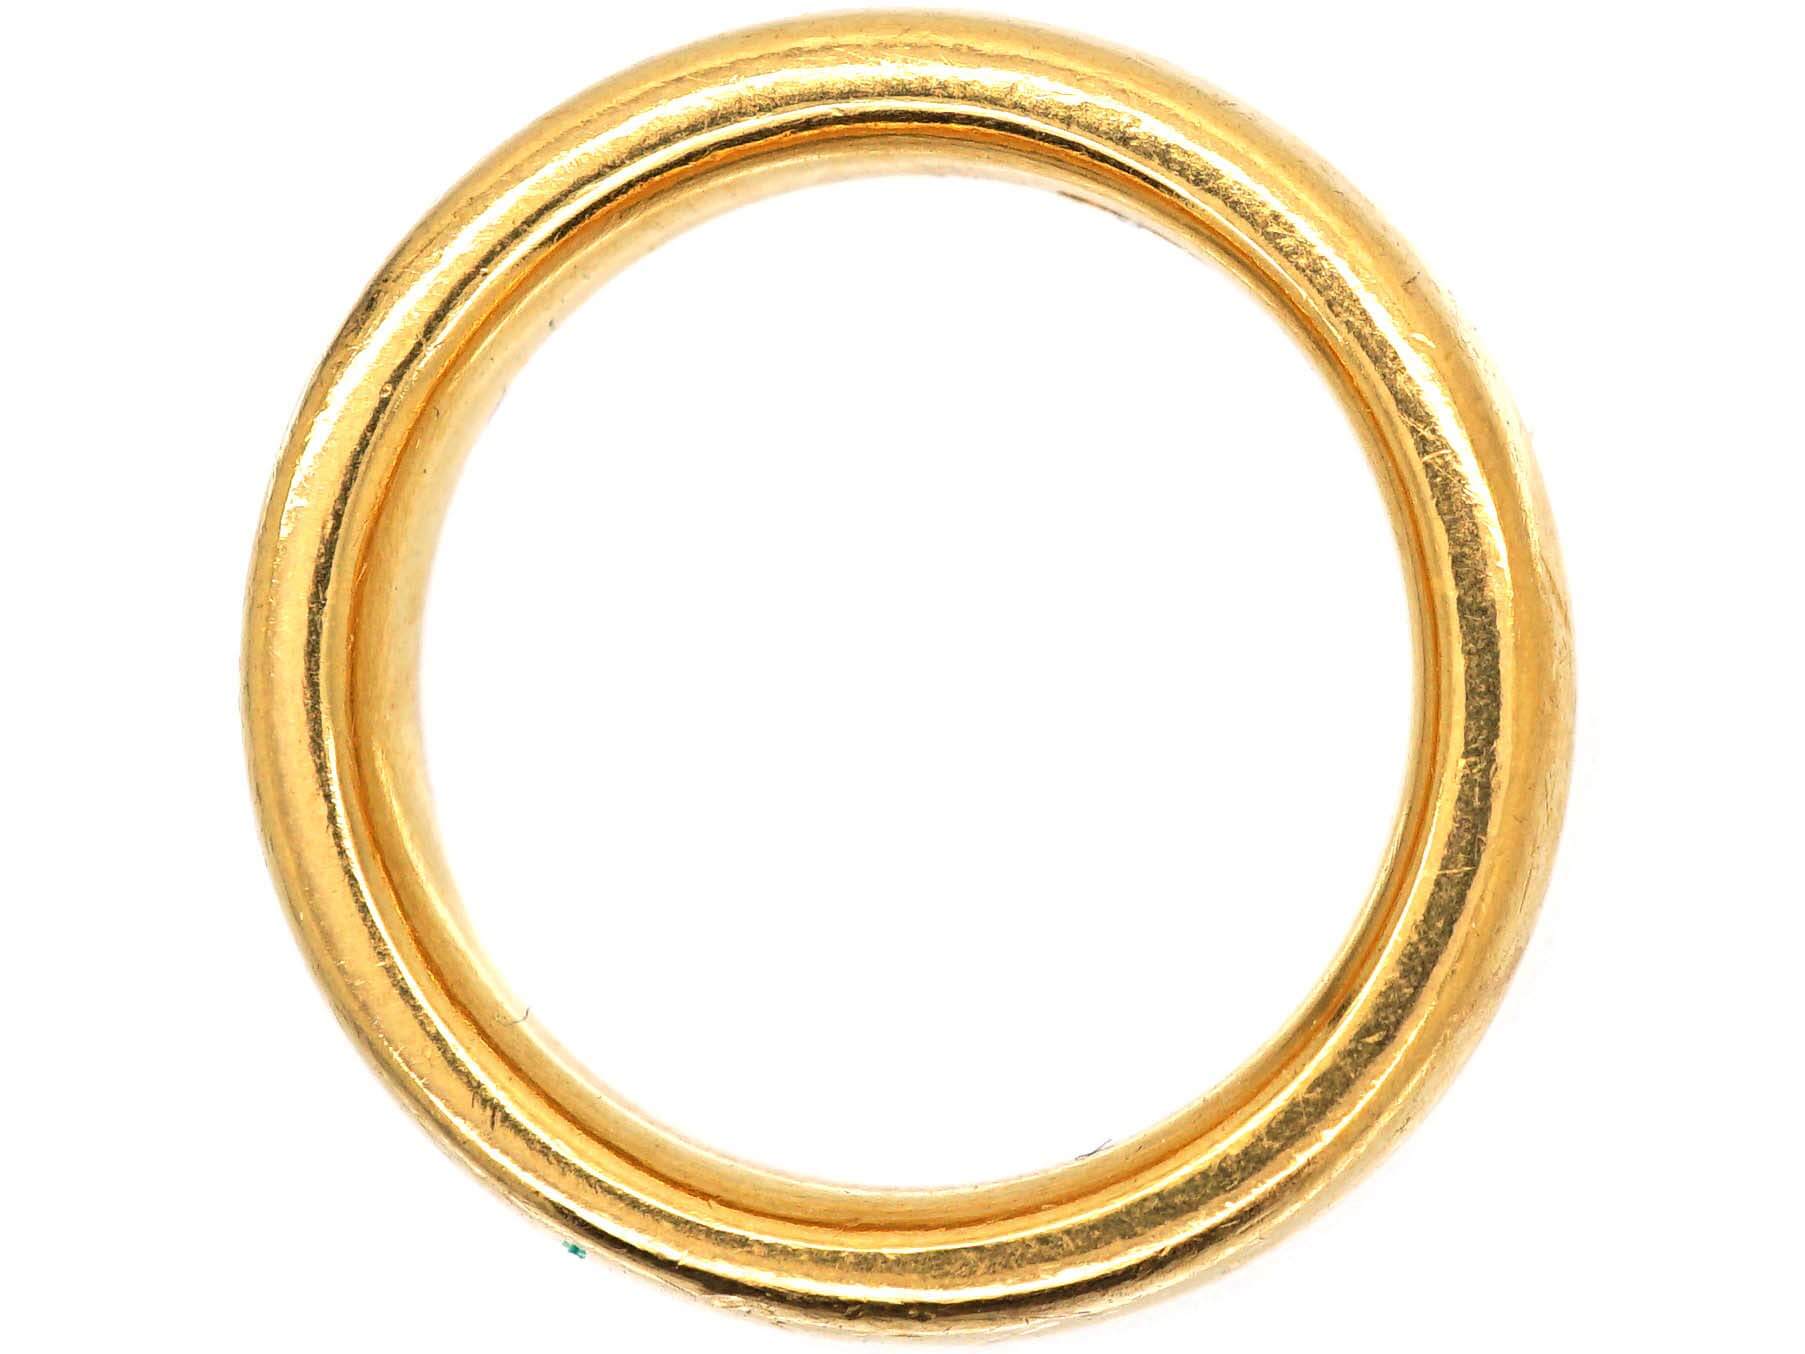 22ct Gold Wide Wedding Ring Assayed in 1920 (829S) | The Antique ...